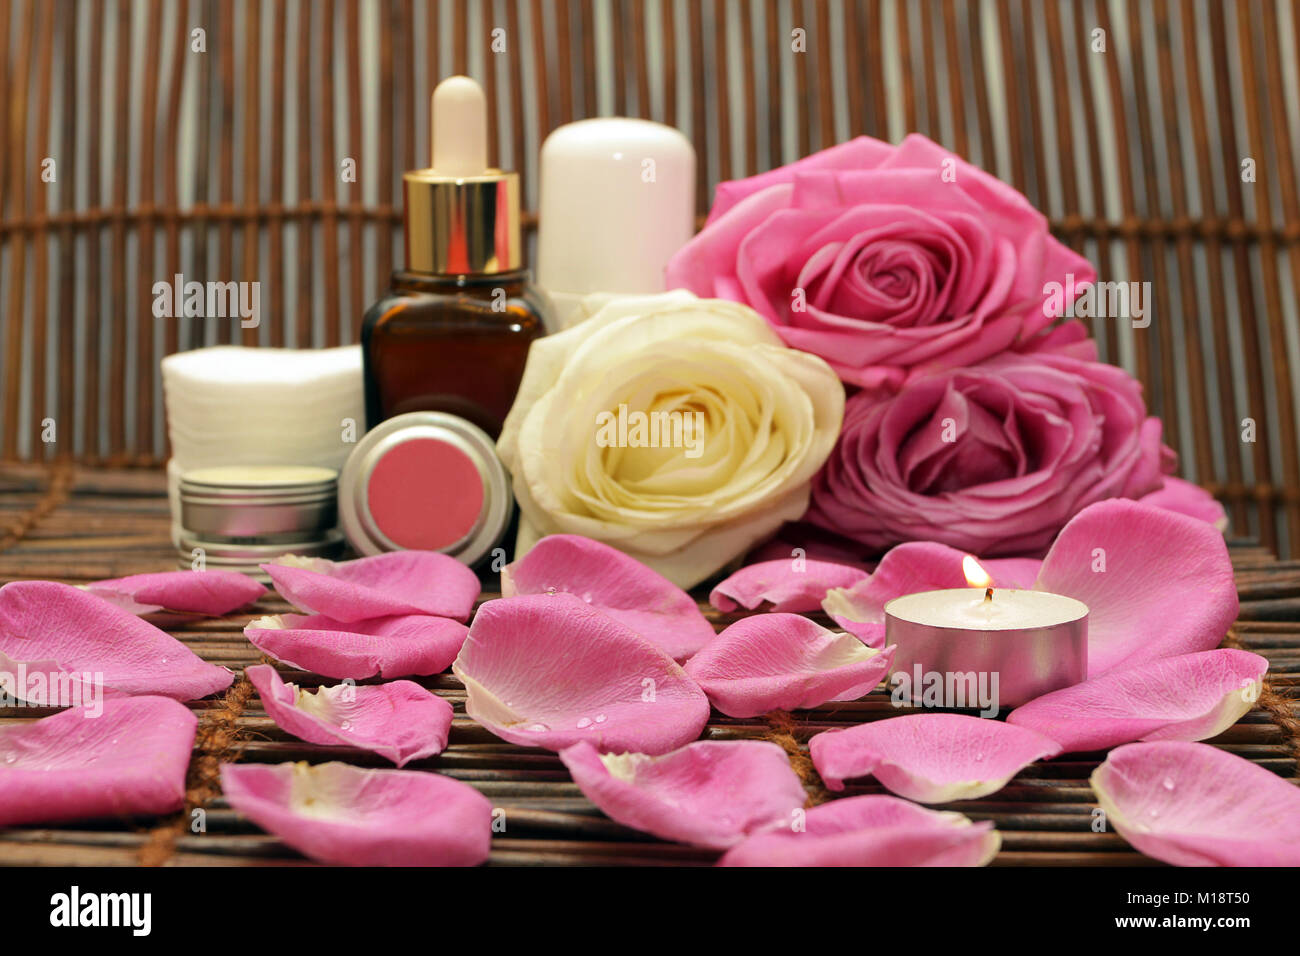 Burning the candle on the background of natural cosmetics with roses and spices Stock Photo